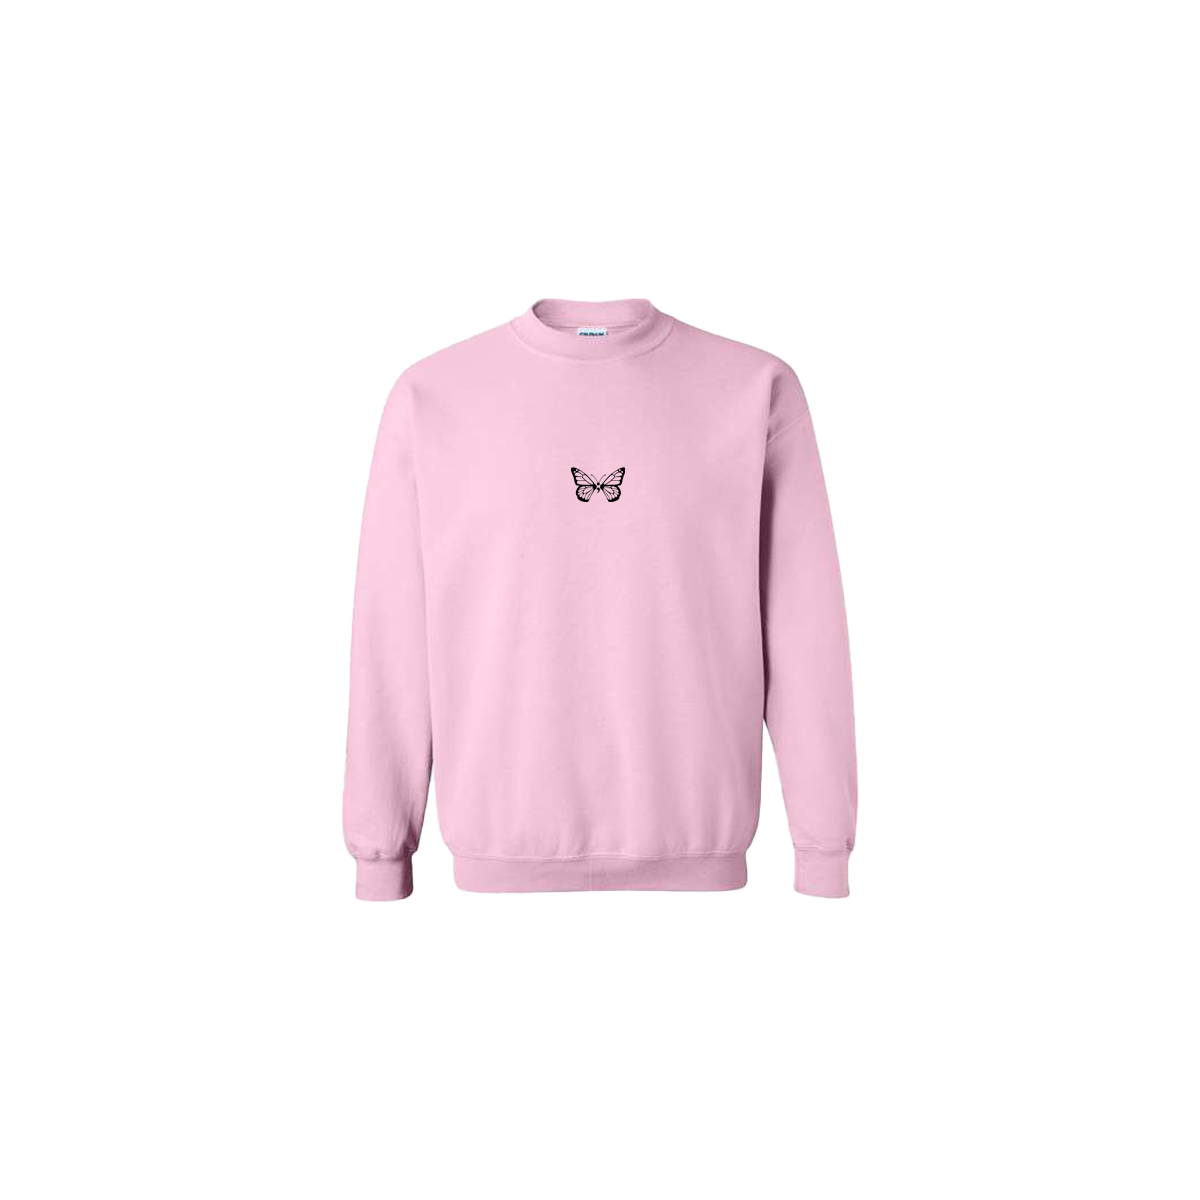 Butterfly Embroidered Light Pink Crewneck - Mental Health Awareness Clothing